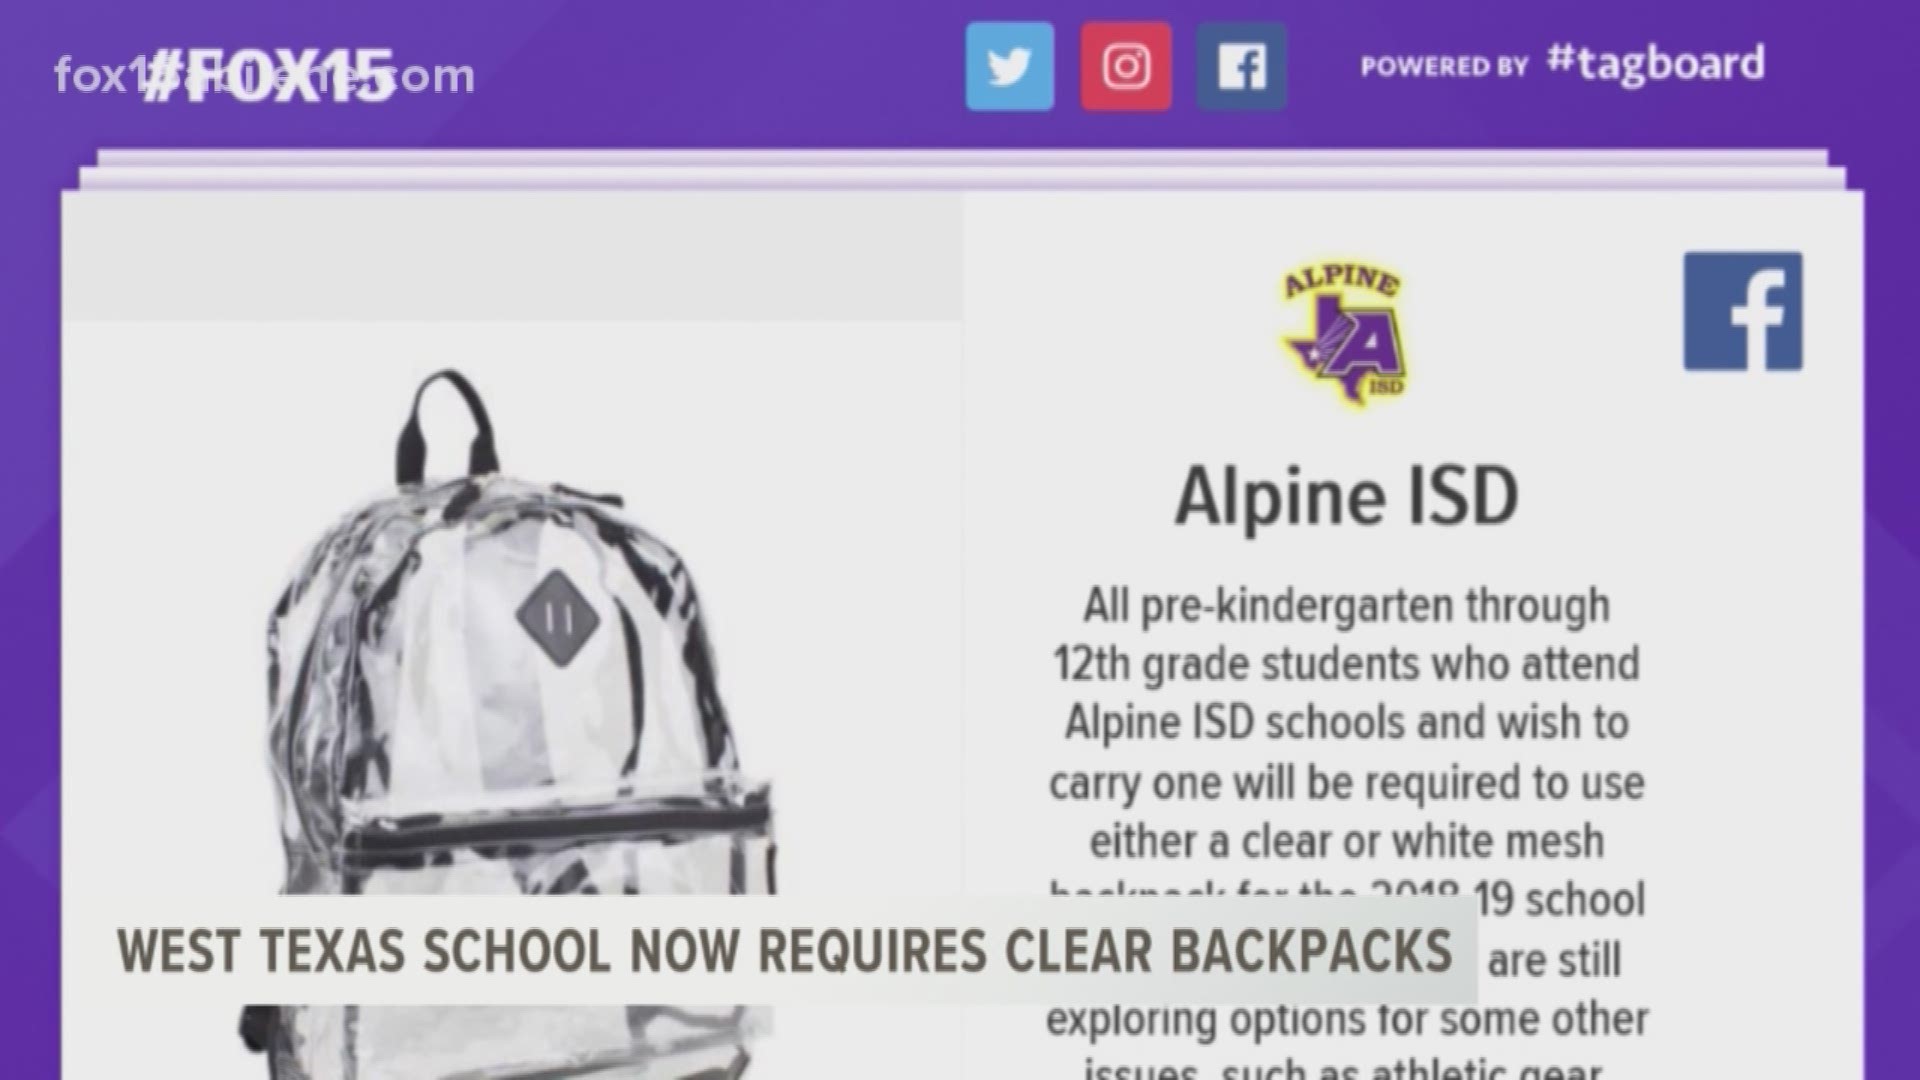 West Texas school requires clear backpacks.